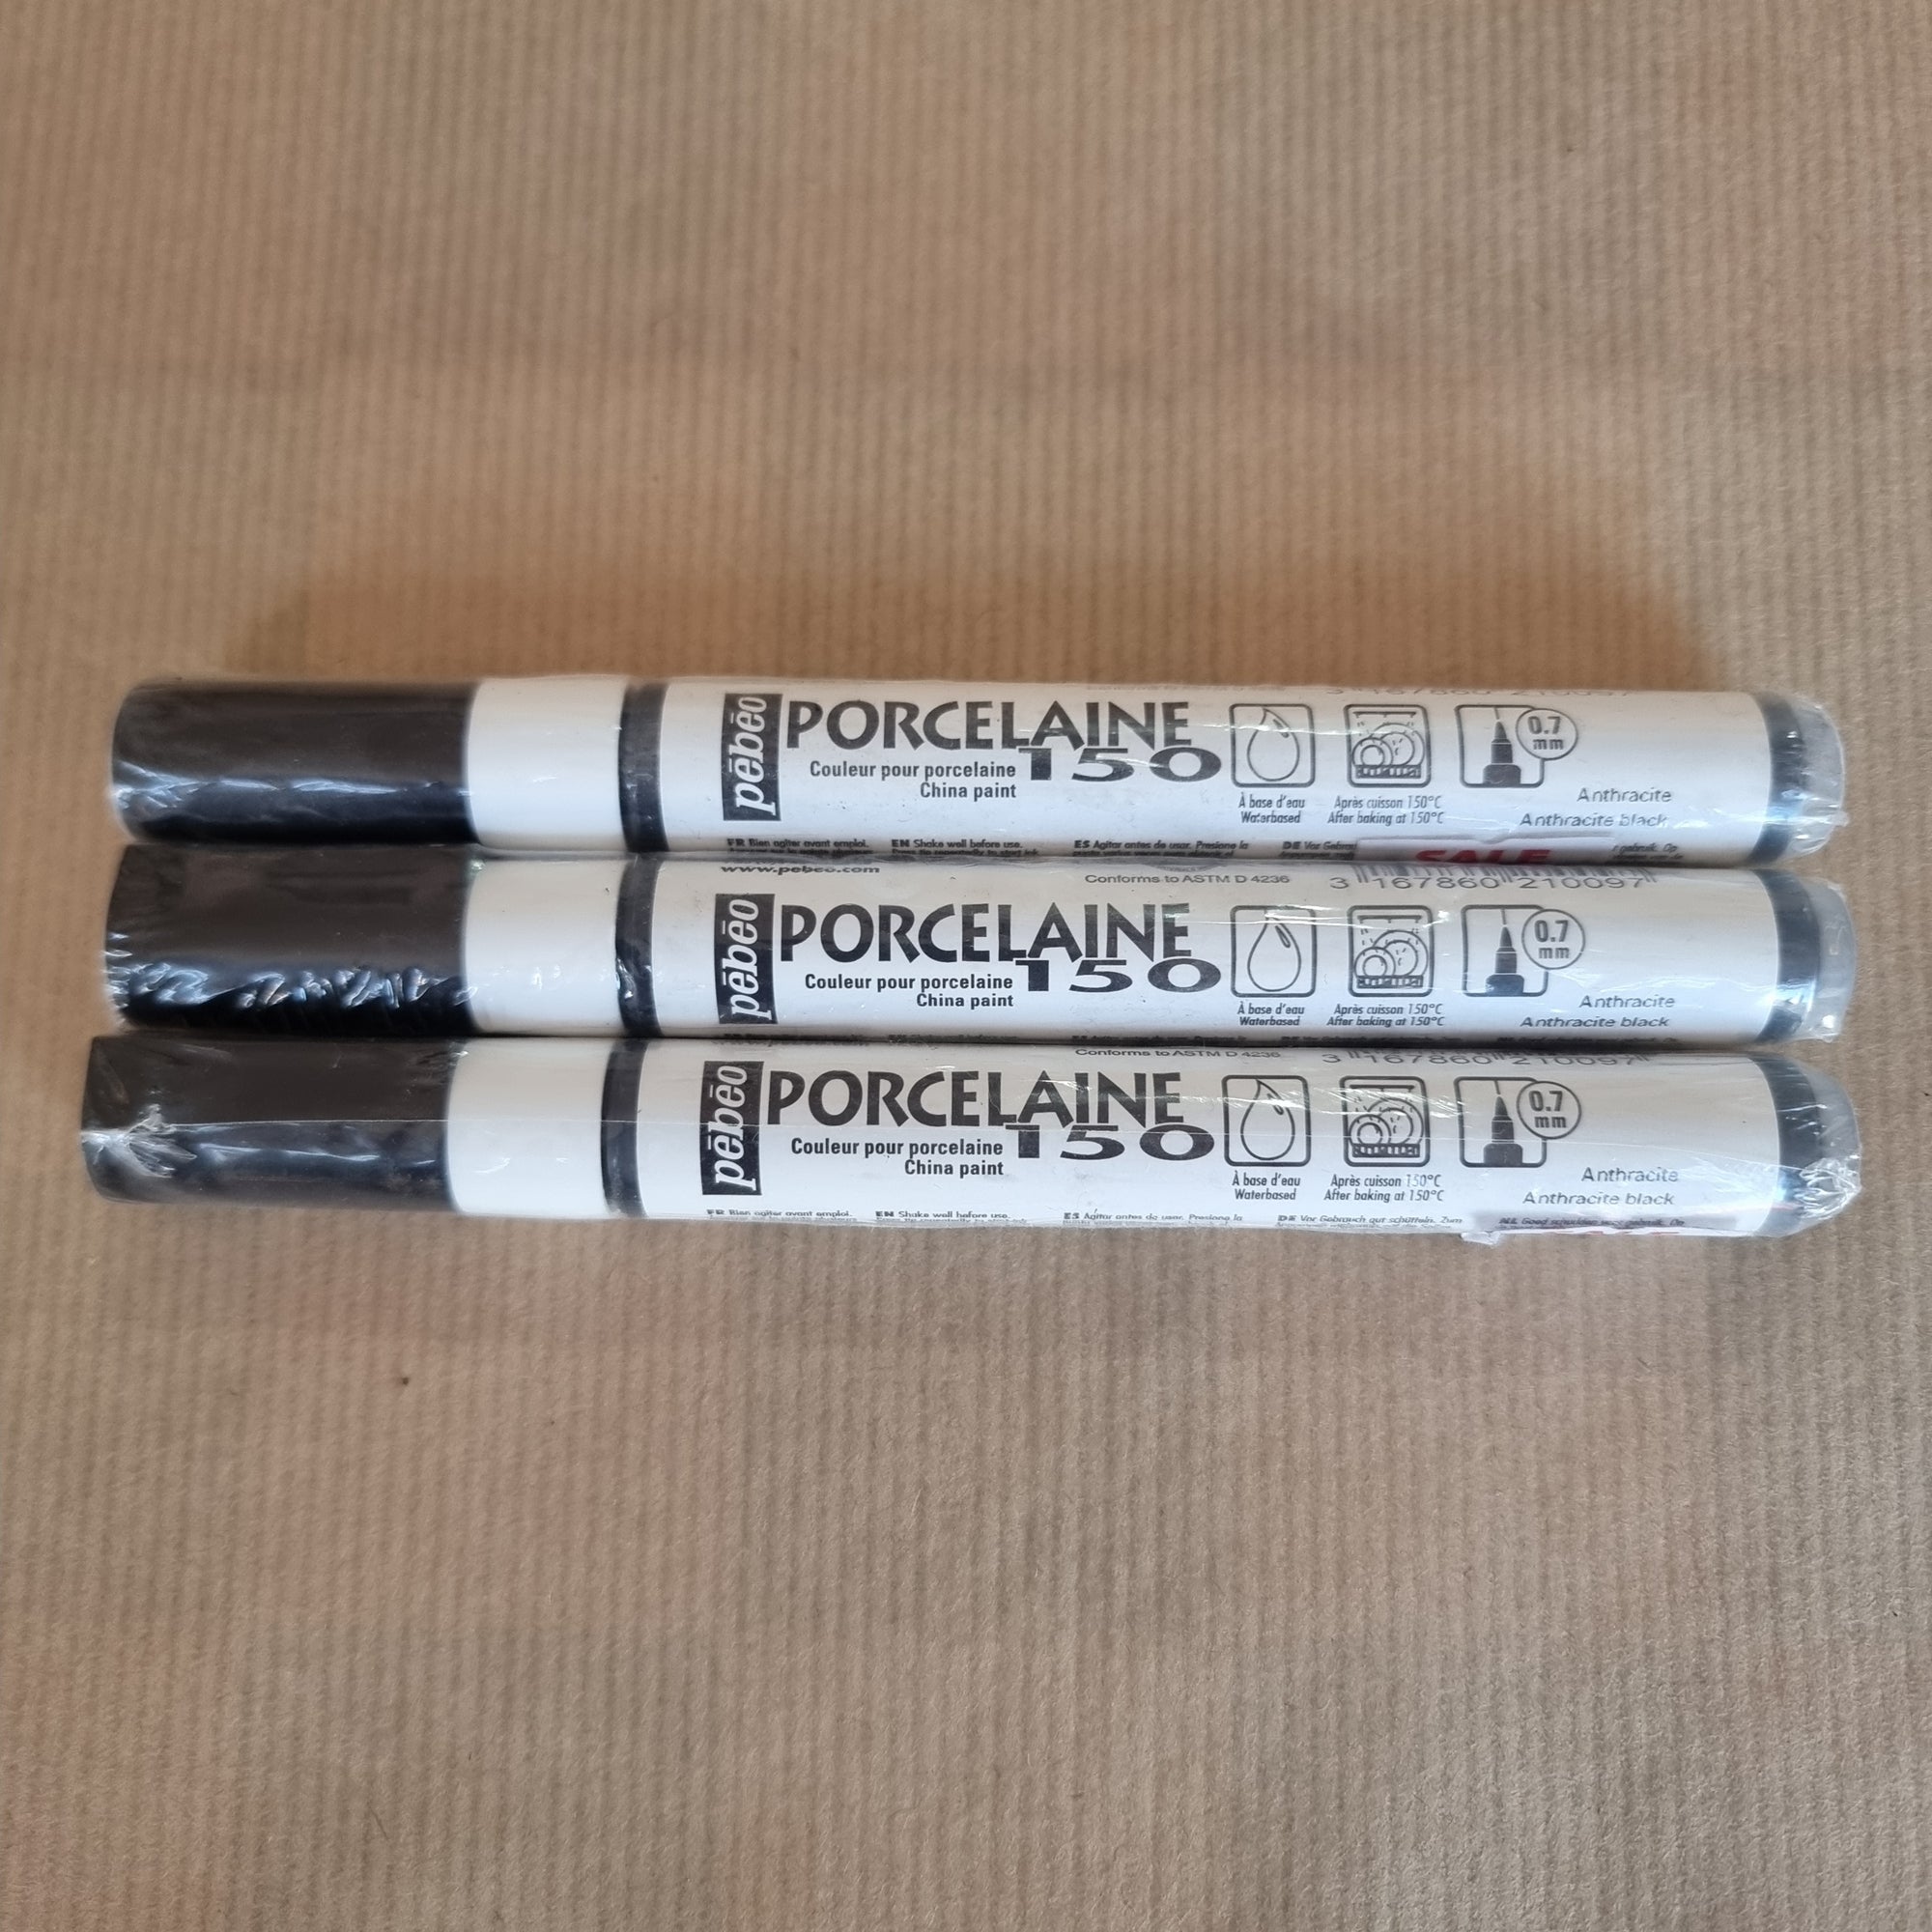 Porcelaine 150 - Thermo-hardening Water Based Colour - Marker Pen